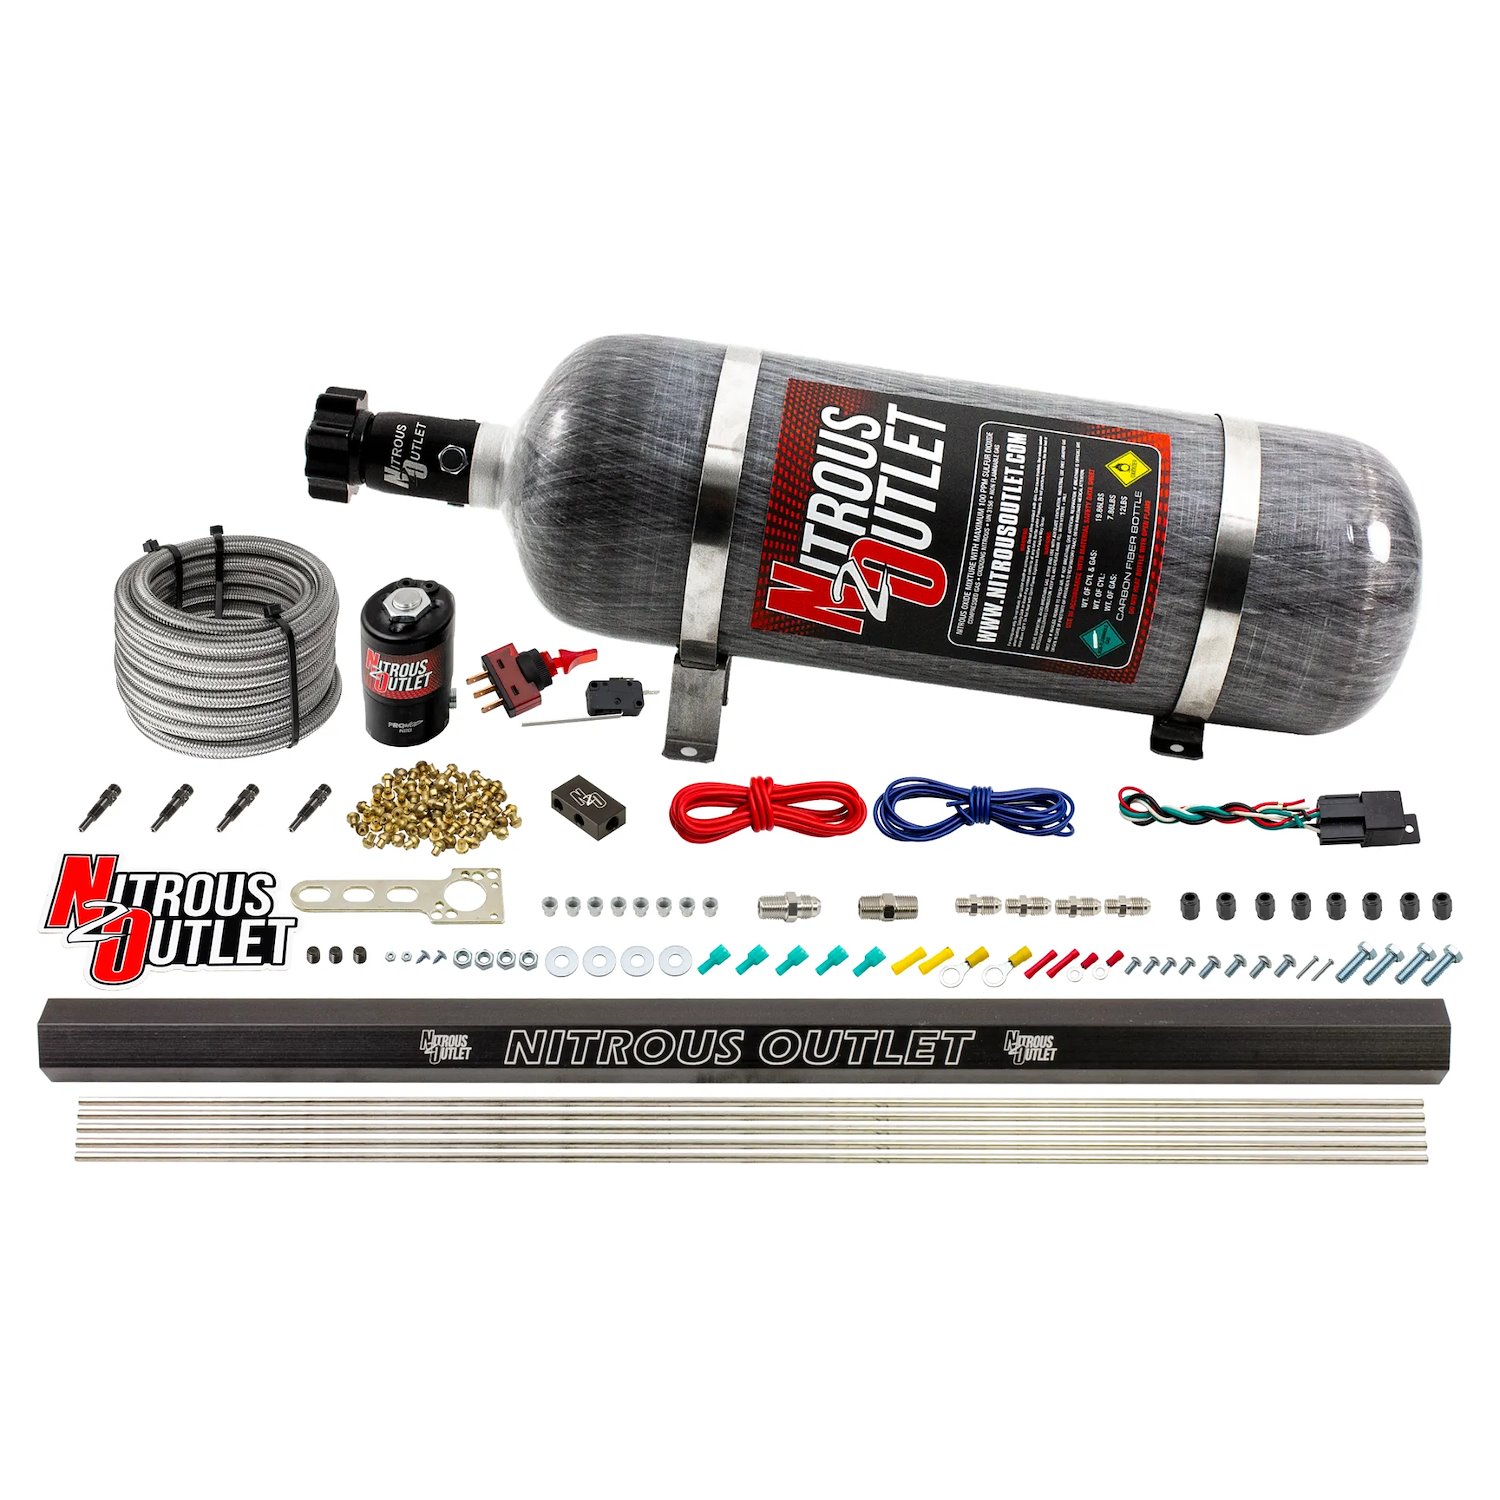 00-10361-SBT-12 Dry 4-Cyl Direct Port System, -.122 Nitrous Solenoid/Injection Rail/SBT Discharge Nozzles, 50-250HP, 12lb Bottle